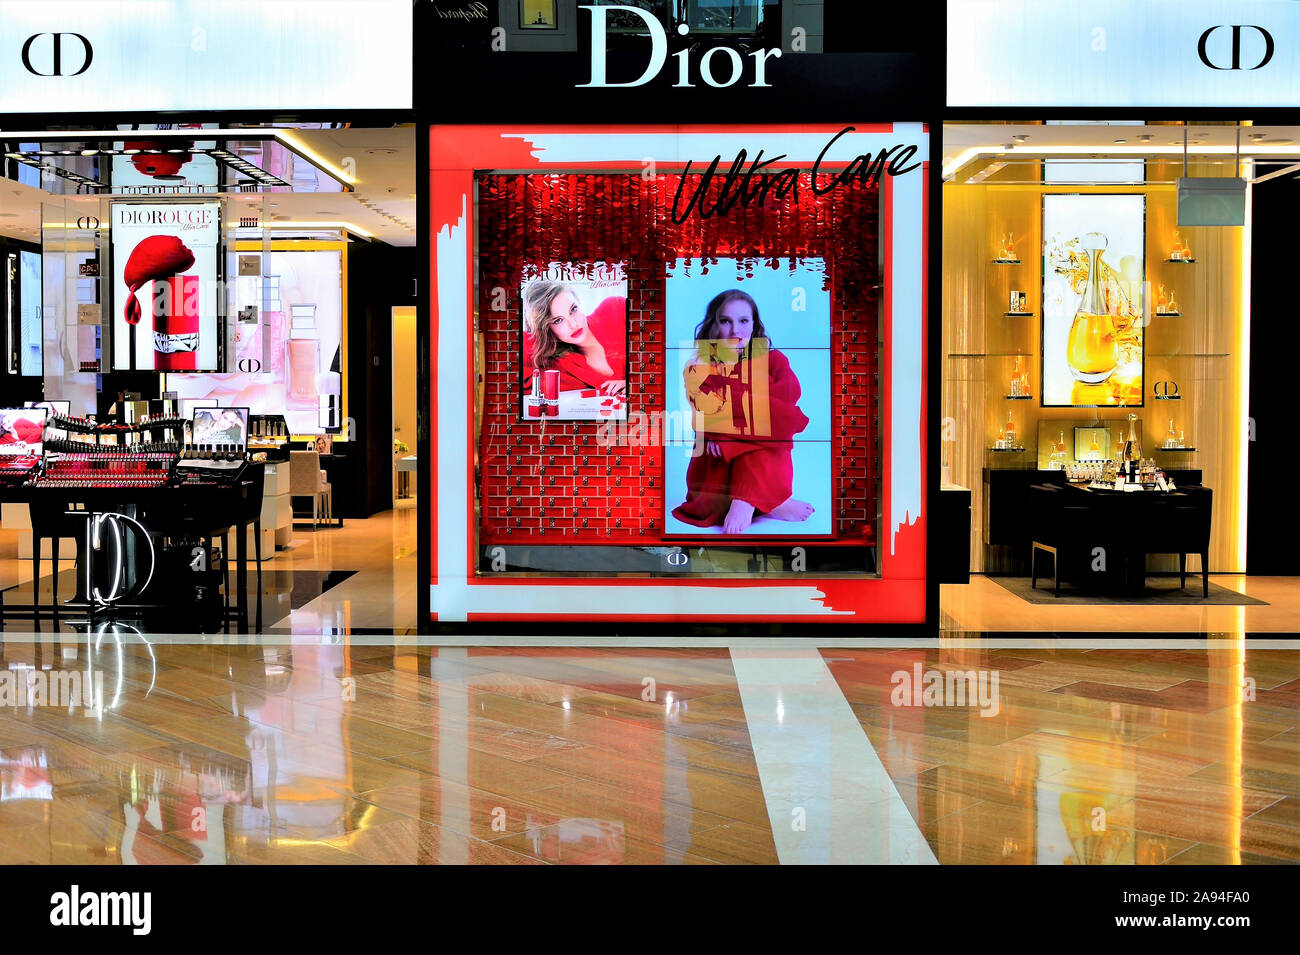 Singapore - September 17 2019: Front view of Dior boutique with window displays and signage at Marina Bay Sands shopping centre, Singapore Stock Photo